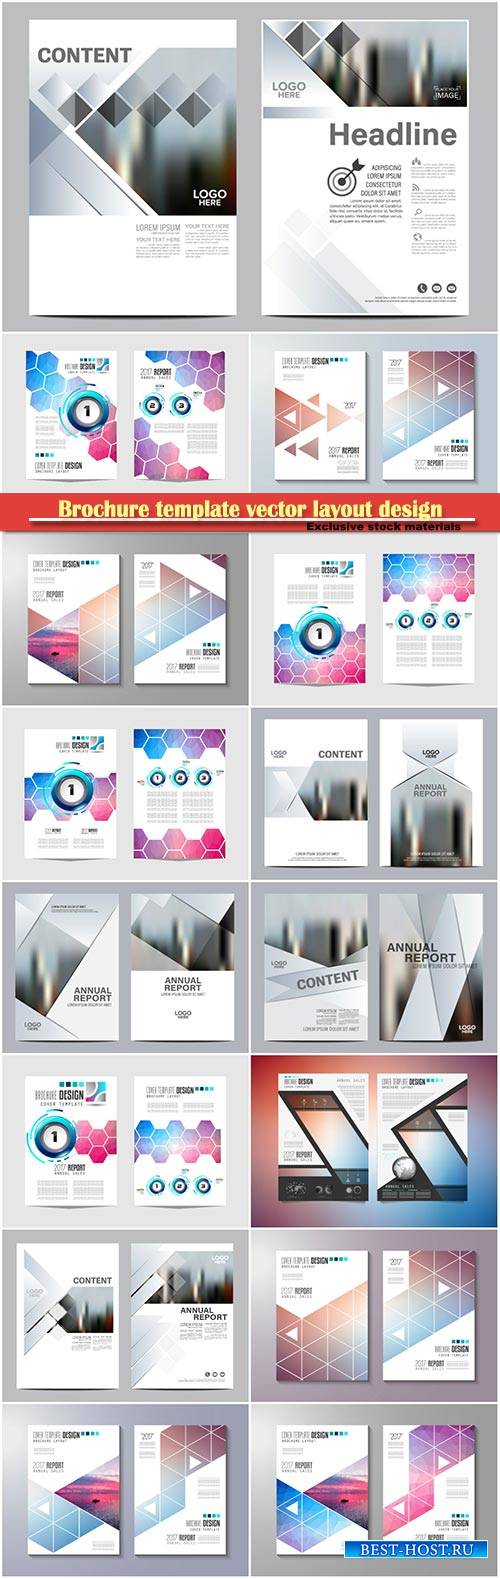 Brochure template vector layout design, corporate business annual report, magazine, flyer mockup # 118